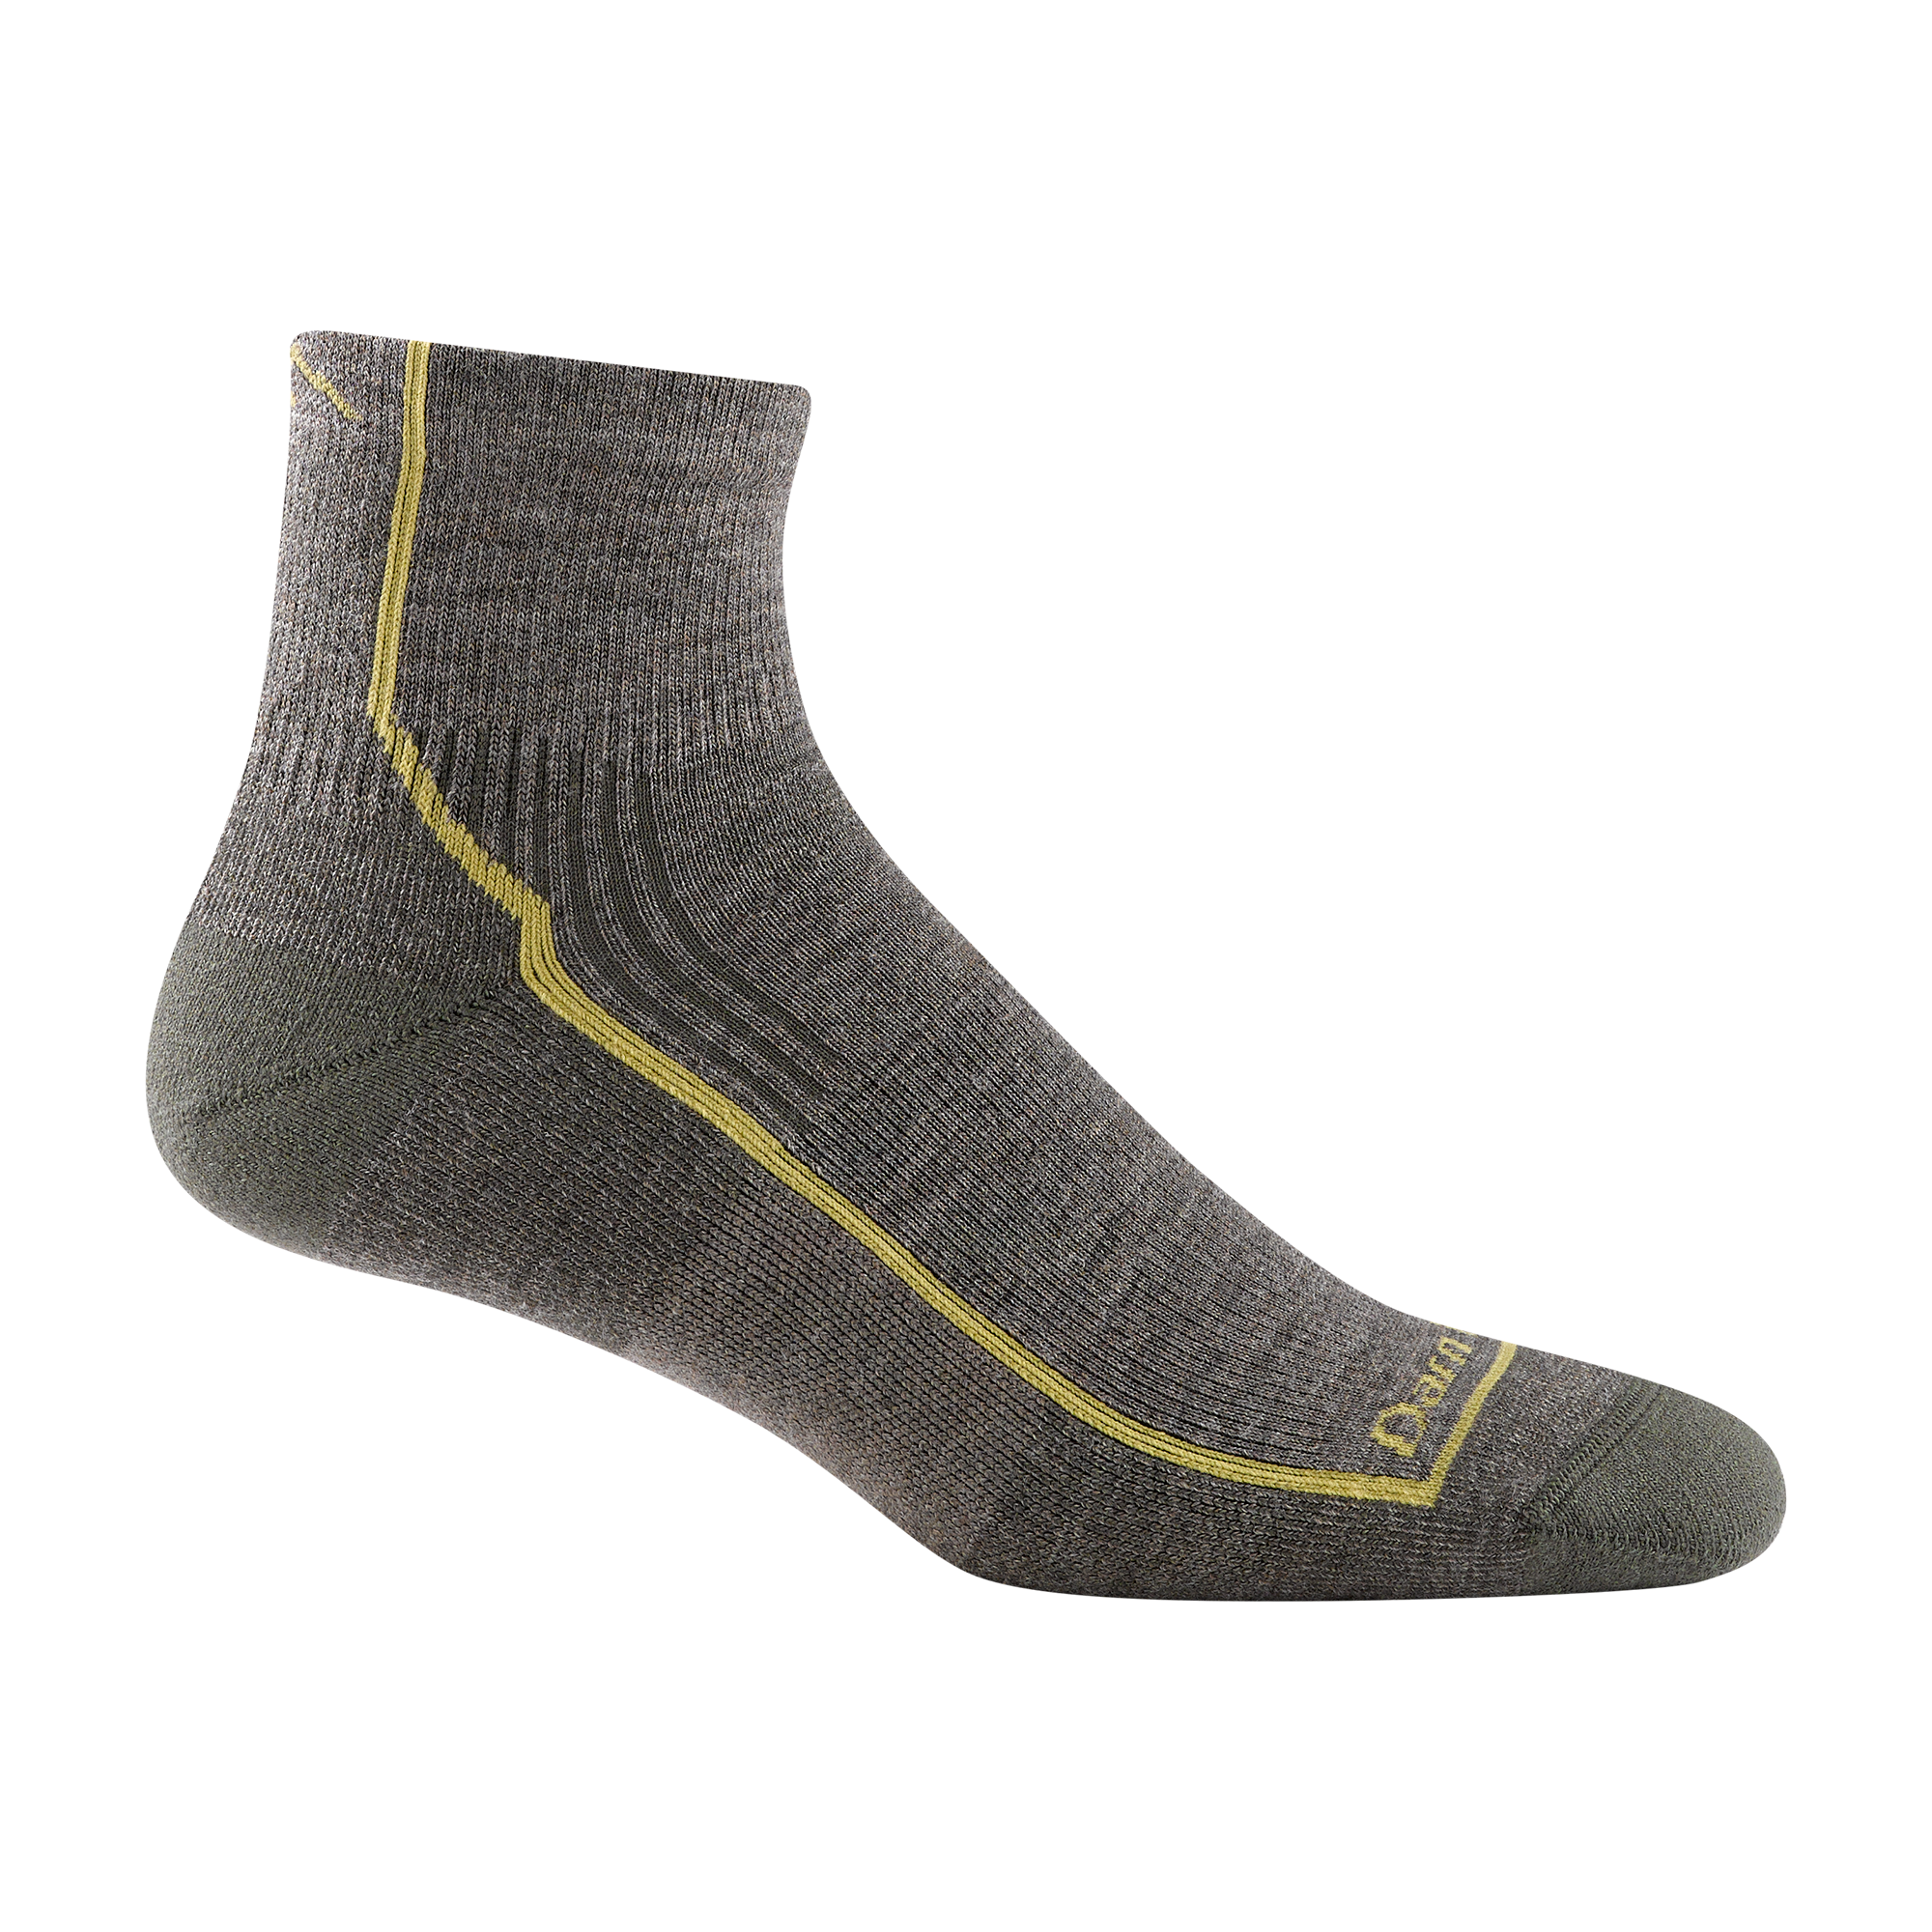 1959 men's quarter hiking sock in  color taupe with yellow forefoot outline